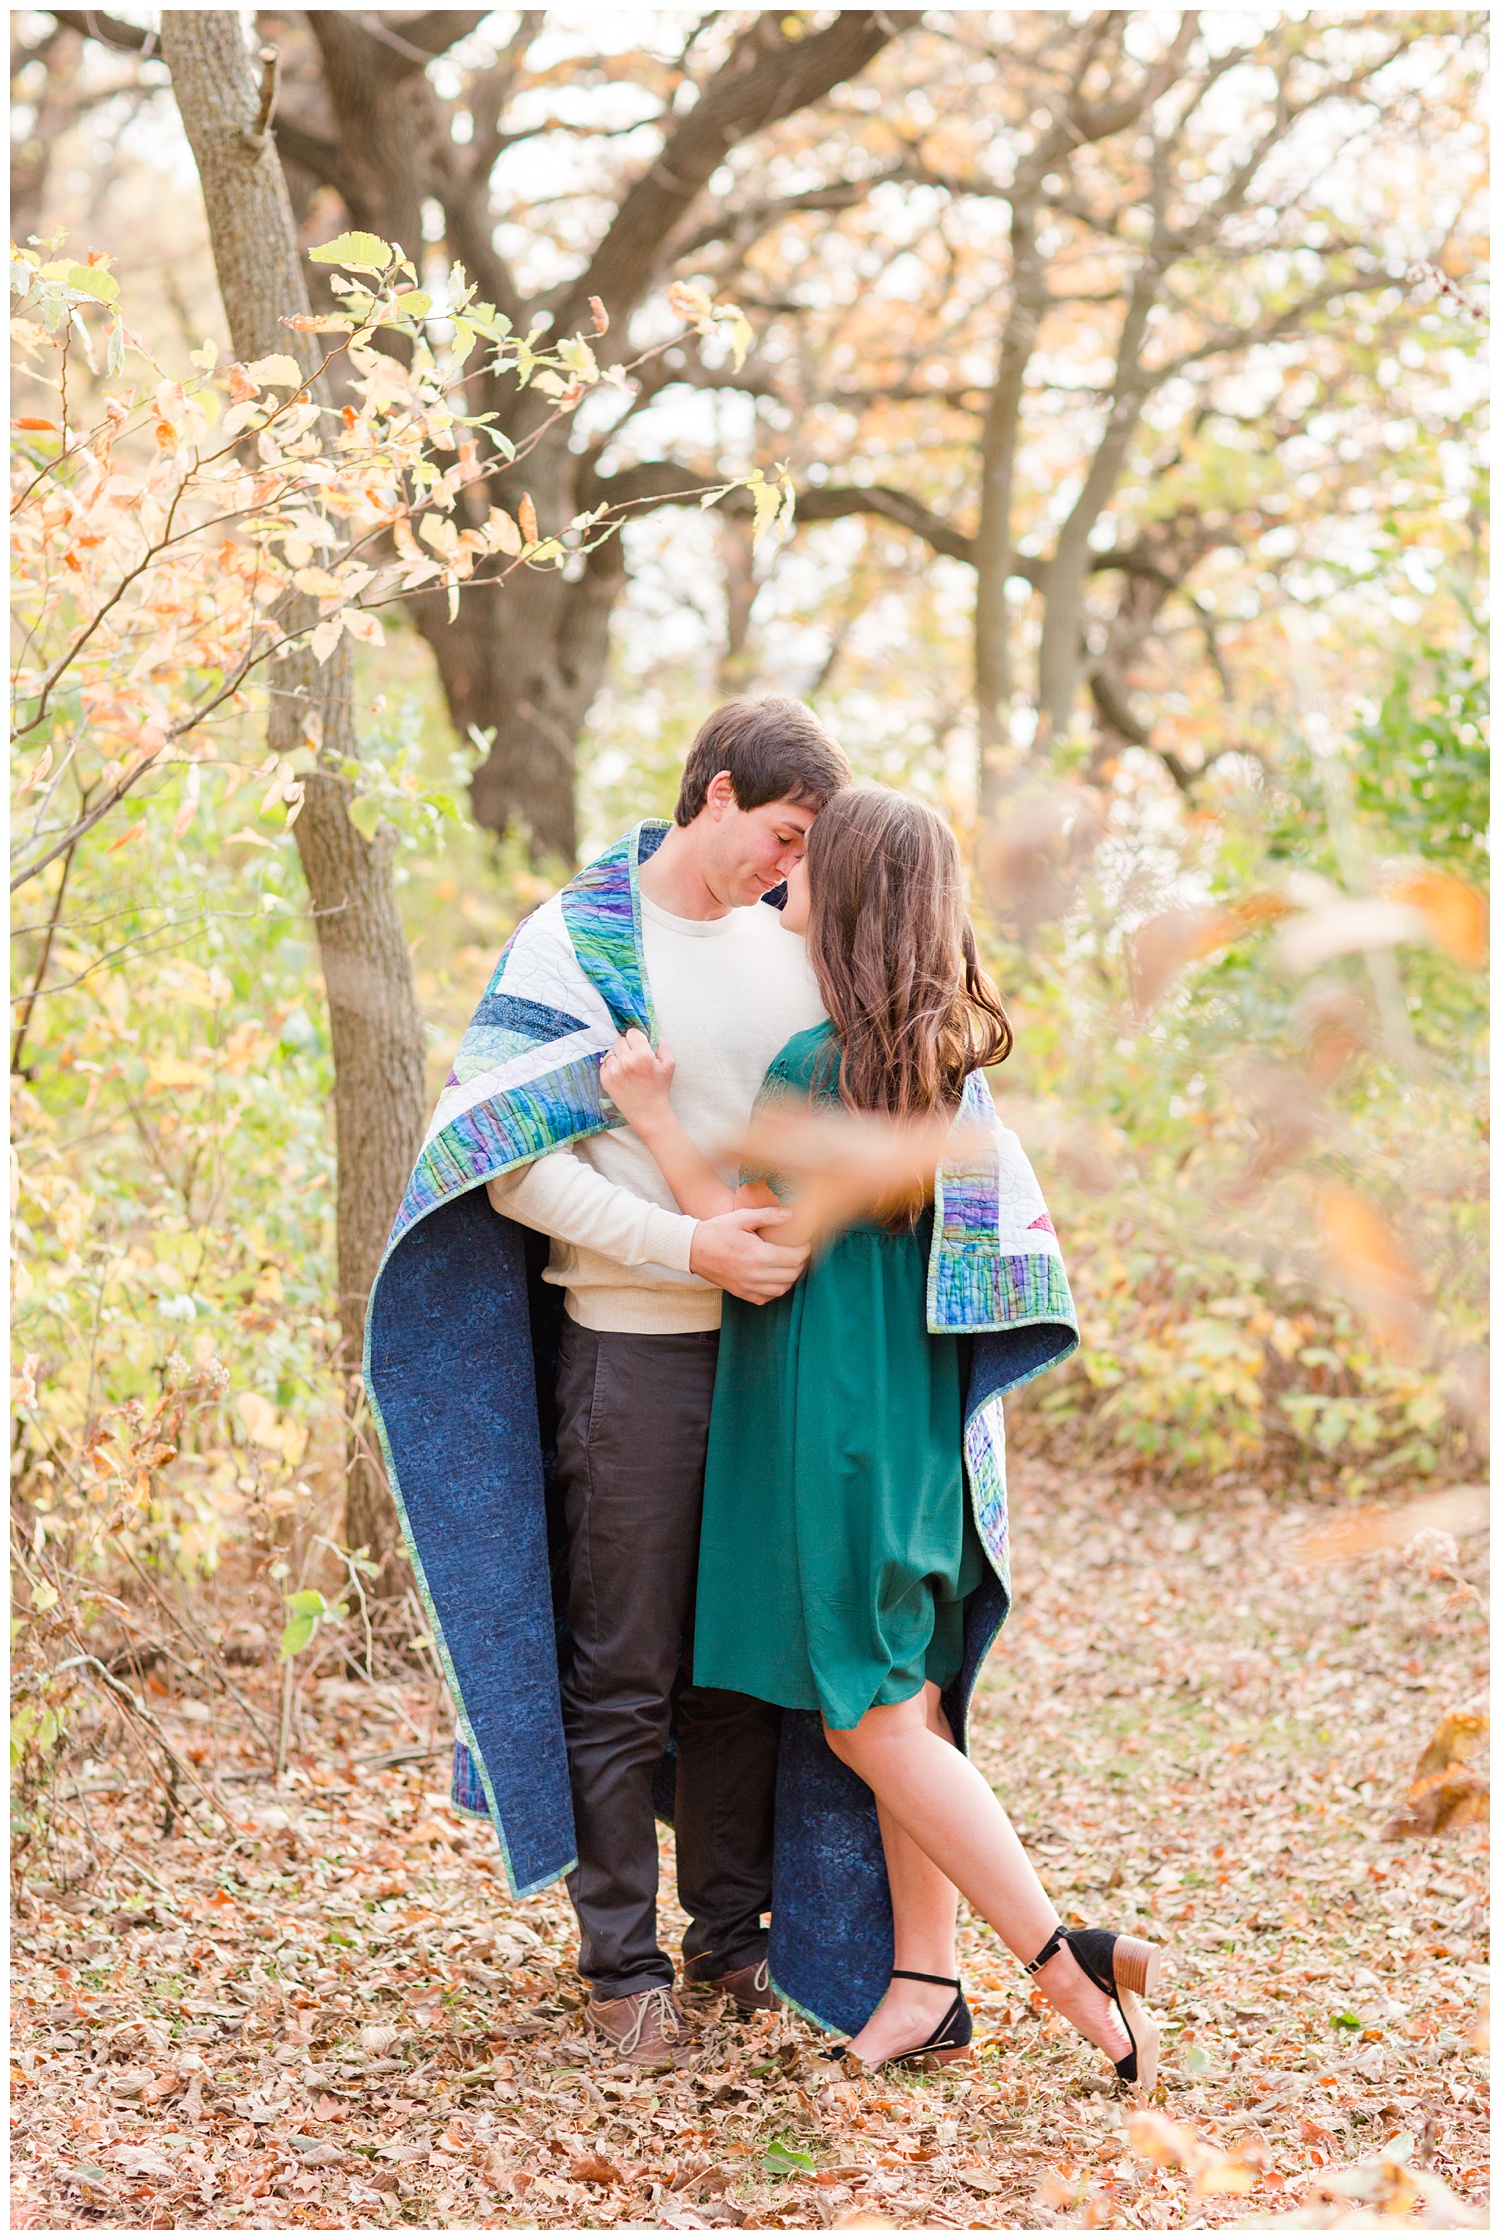 Fall in Iowa, Jenna wearing an emerald green dress embraces Brady while both wrapped in a quilt in the middle of an autumn path at Lost Island Nature Center | CB Studio